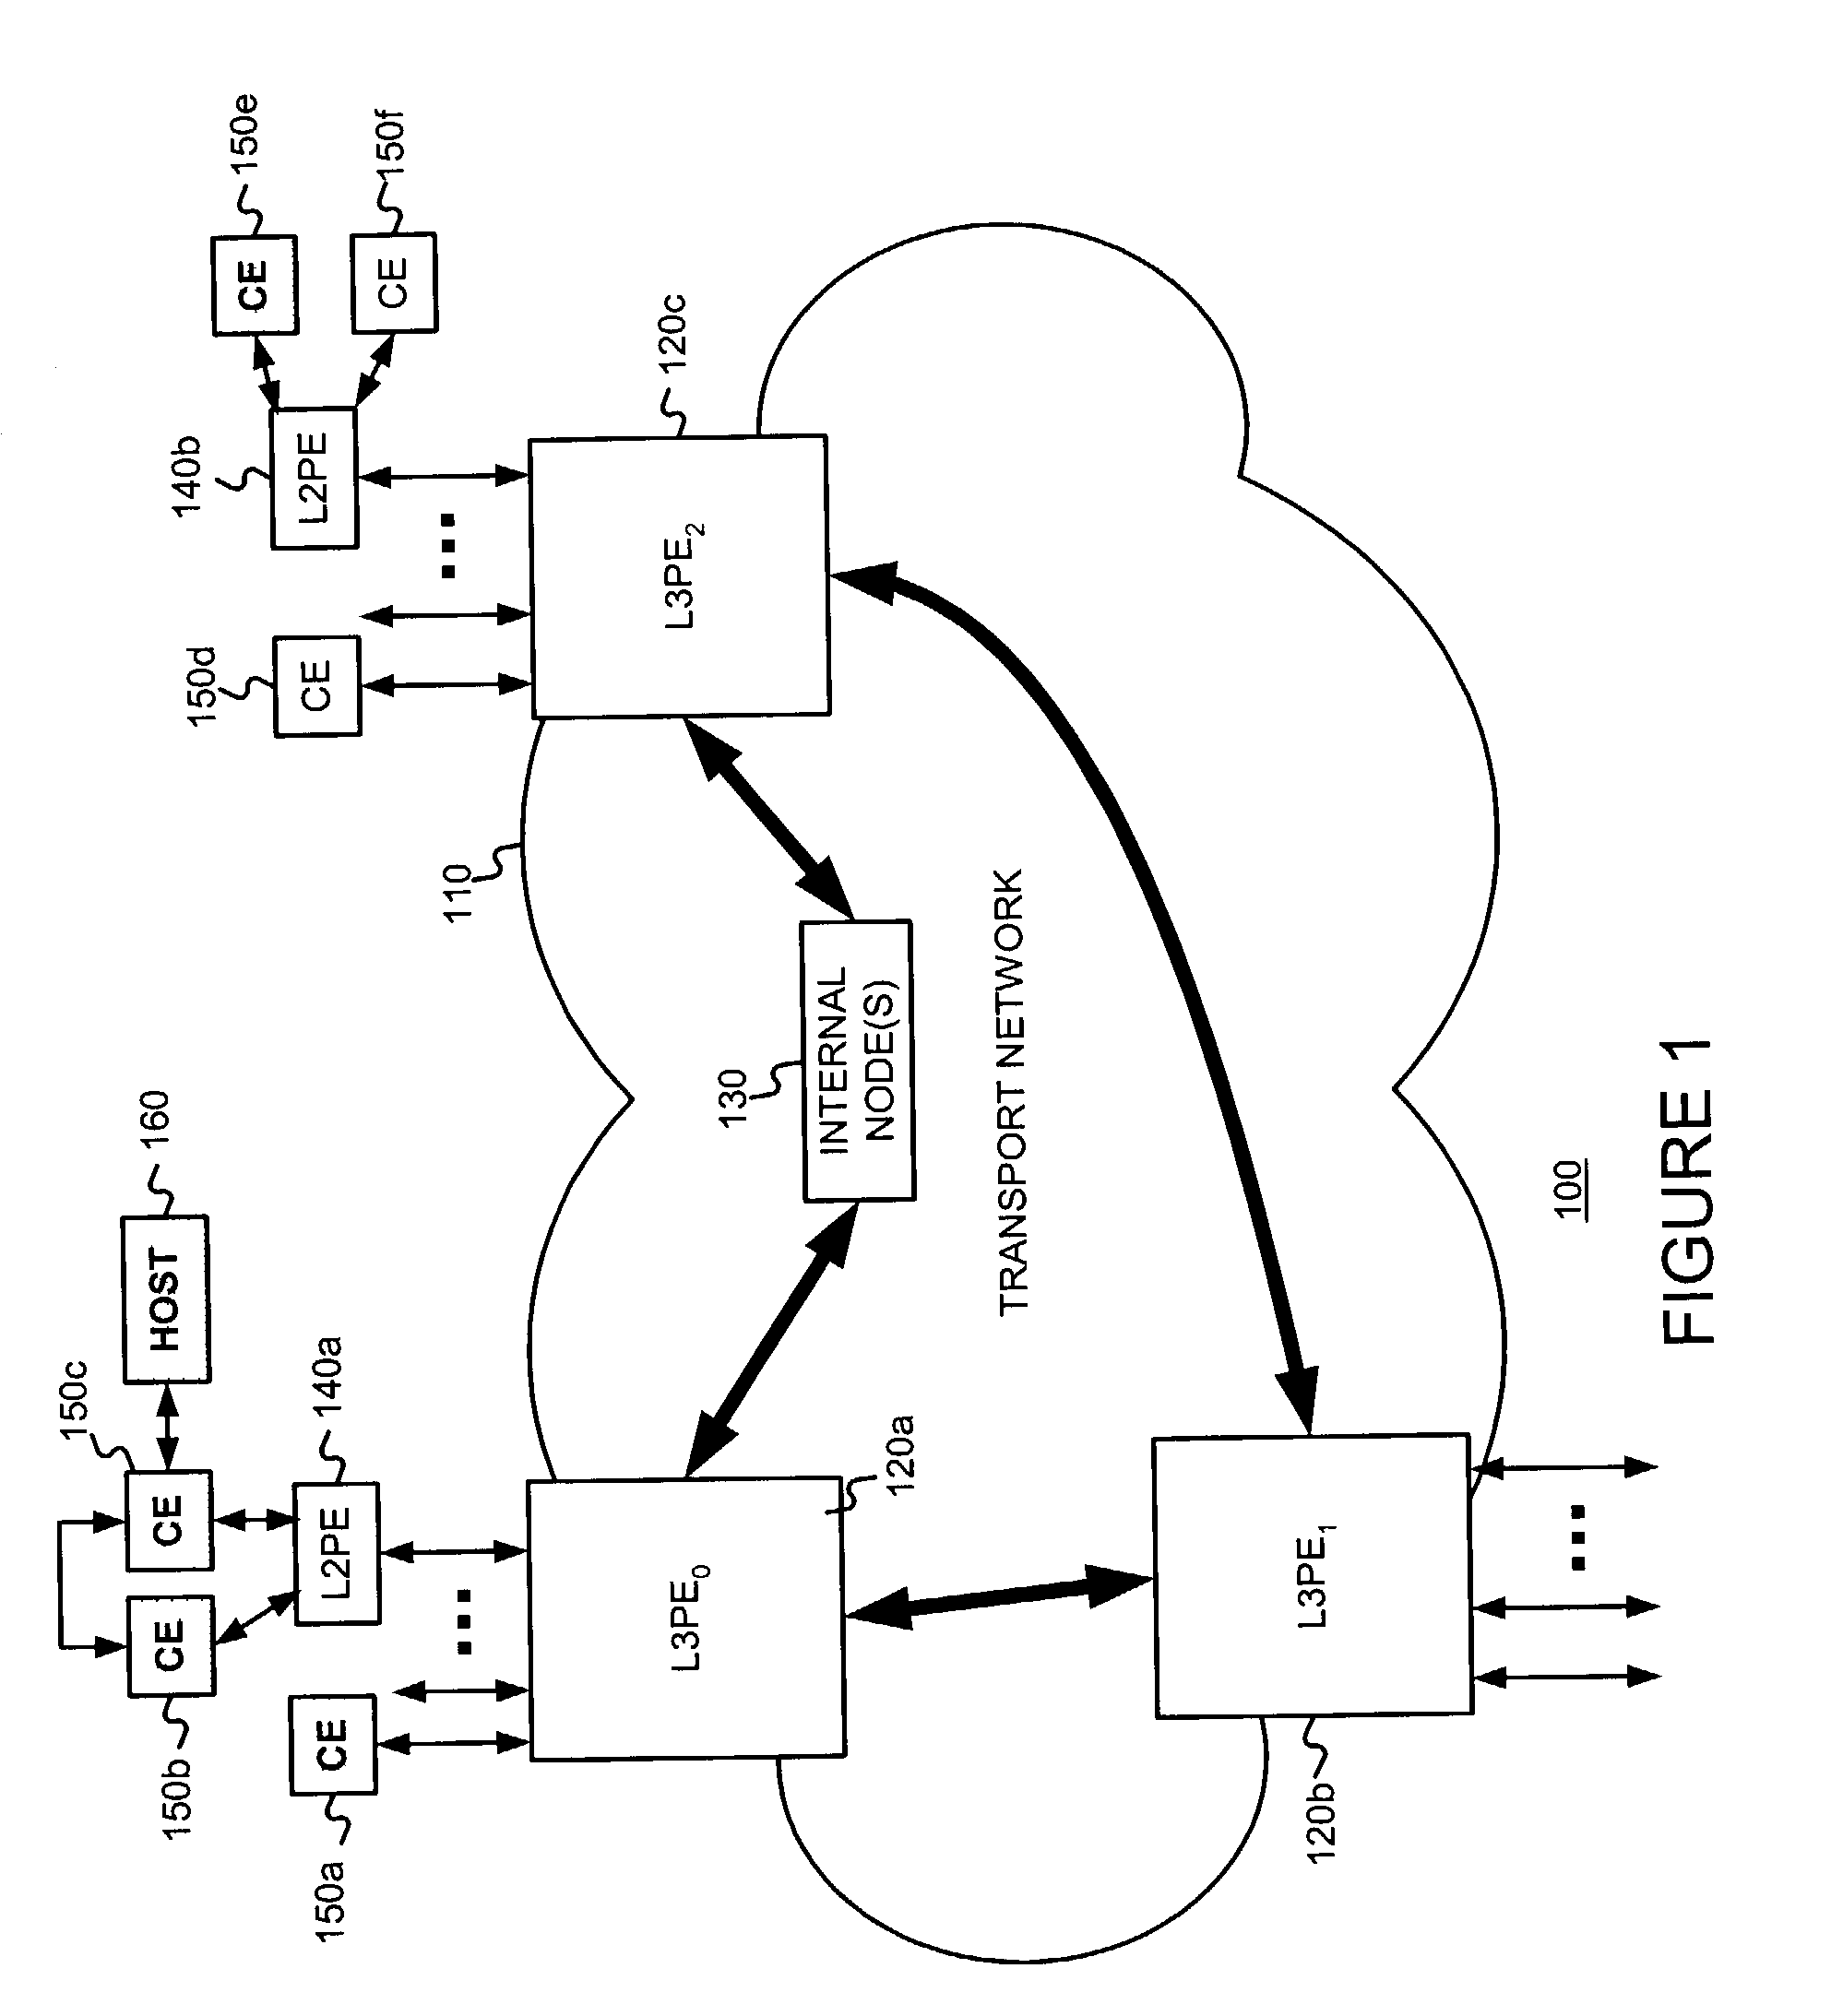 Decoupling functionality related to providing a transparent local area network segment service